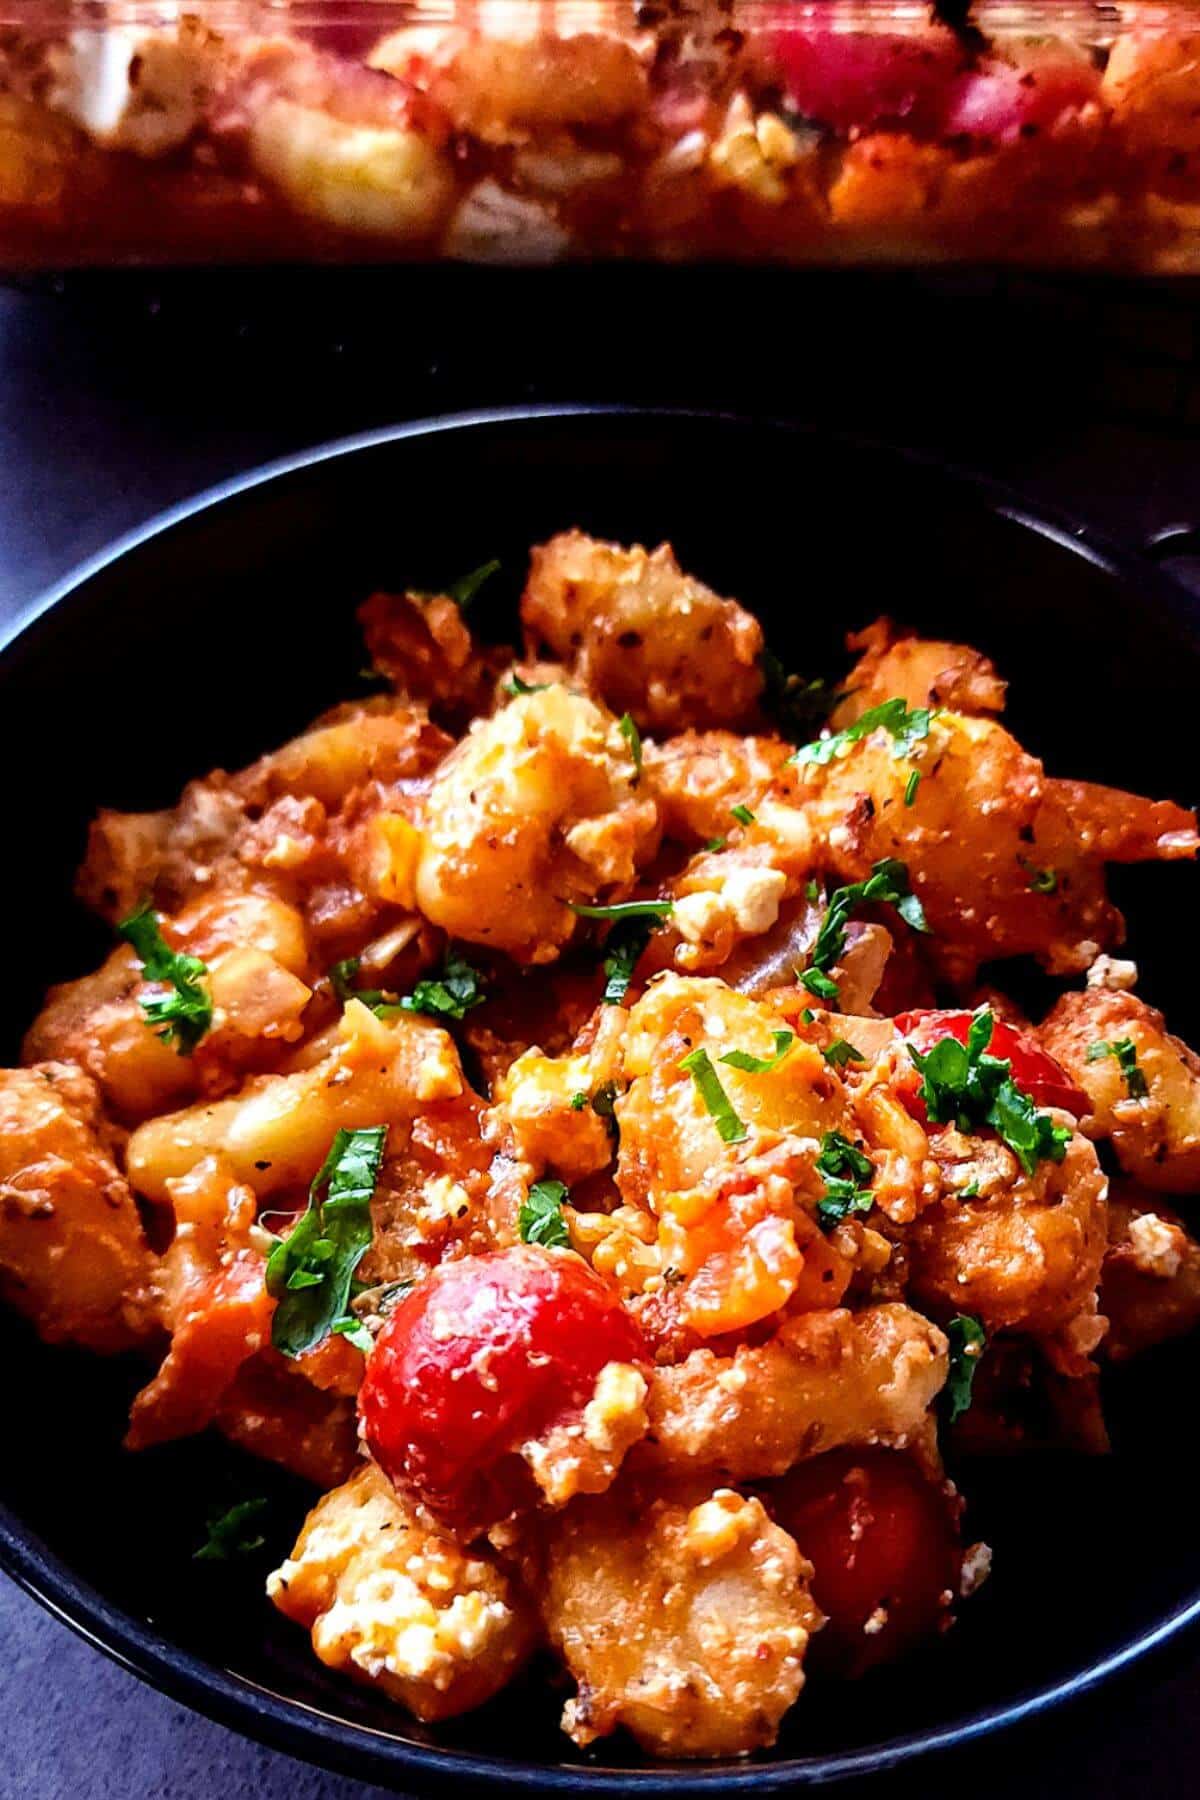 Baked gnocchi with feta and tomatoes in a black bowl.